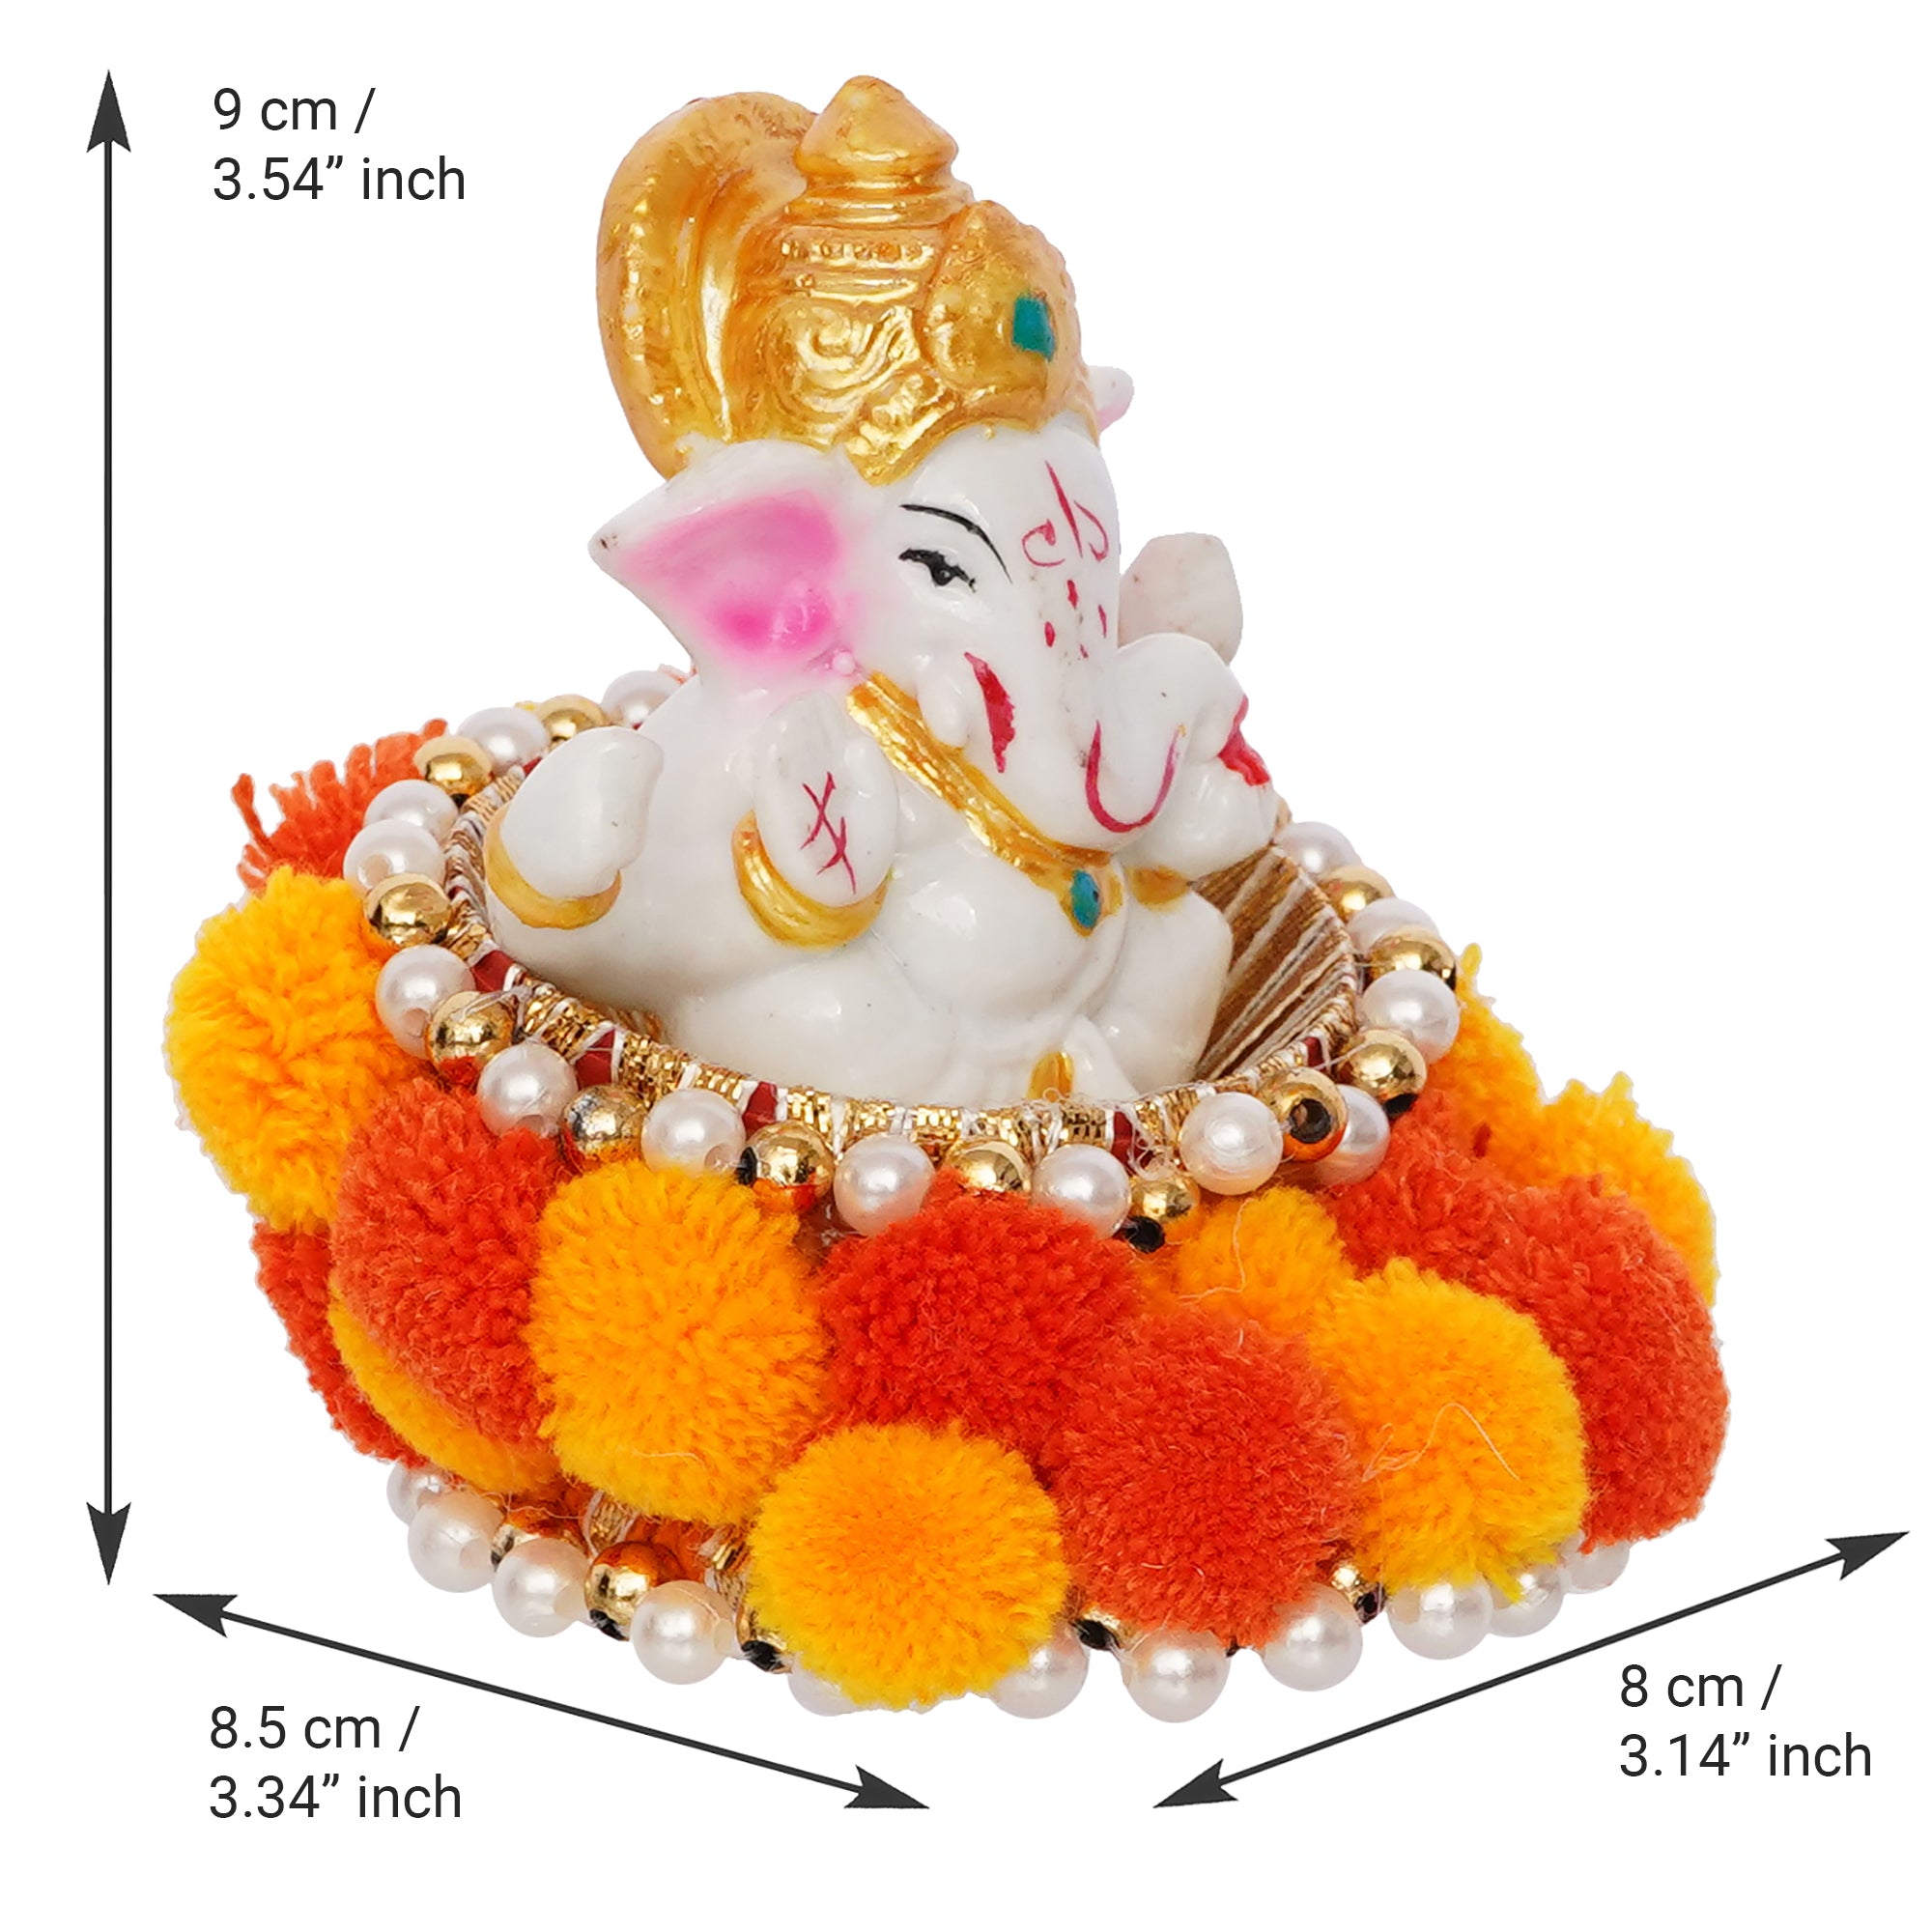 Polyresin Lord Ganesha Idol on Decorative Handcrafted Floral Plate for Home and Car Dashboard 3